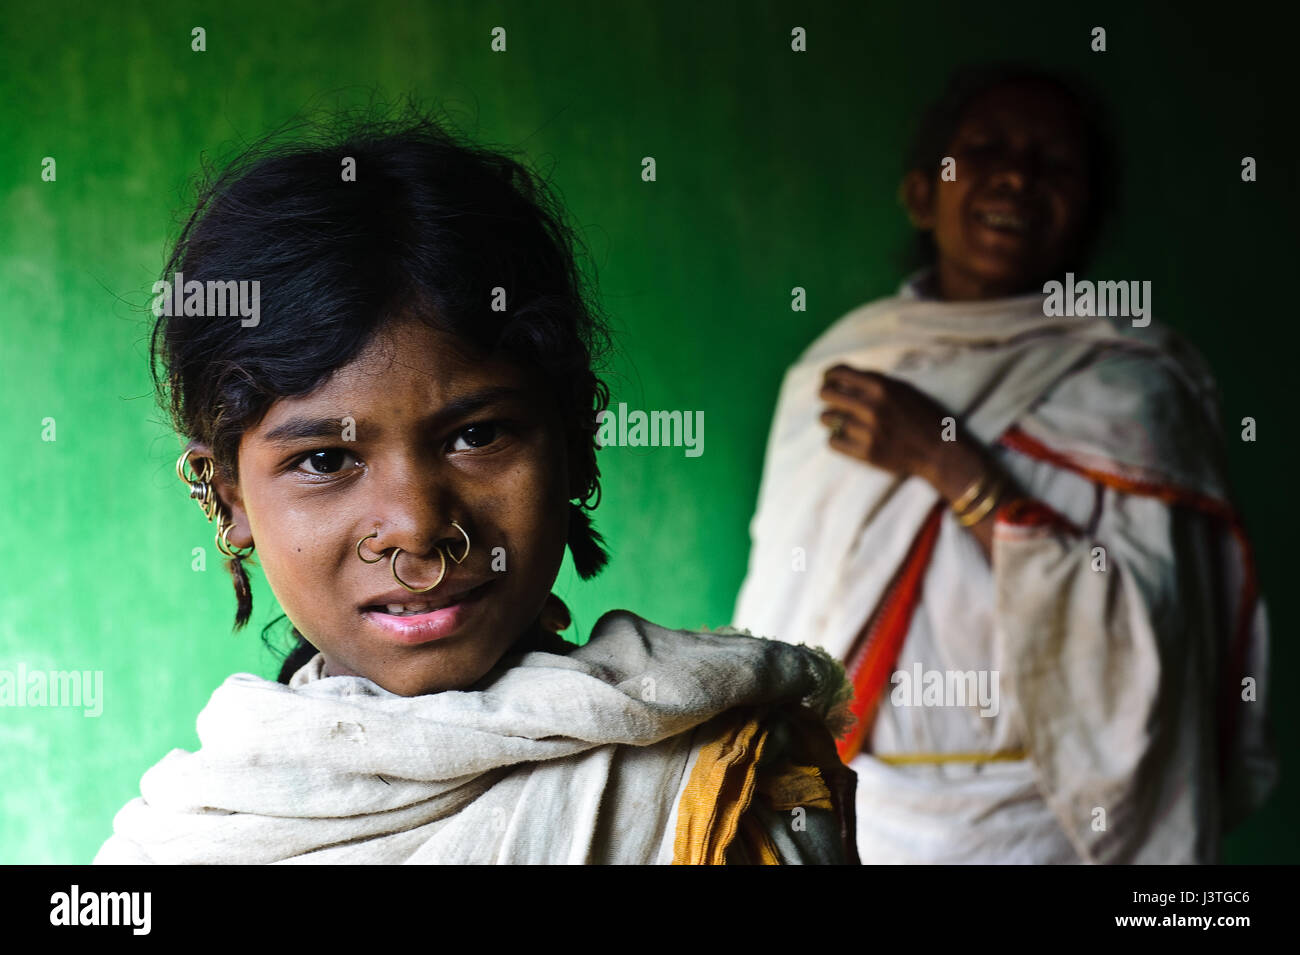 Girl and woman from the Dongriya Kondh tribe ( India) Stock Photo